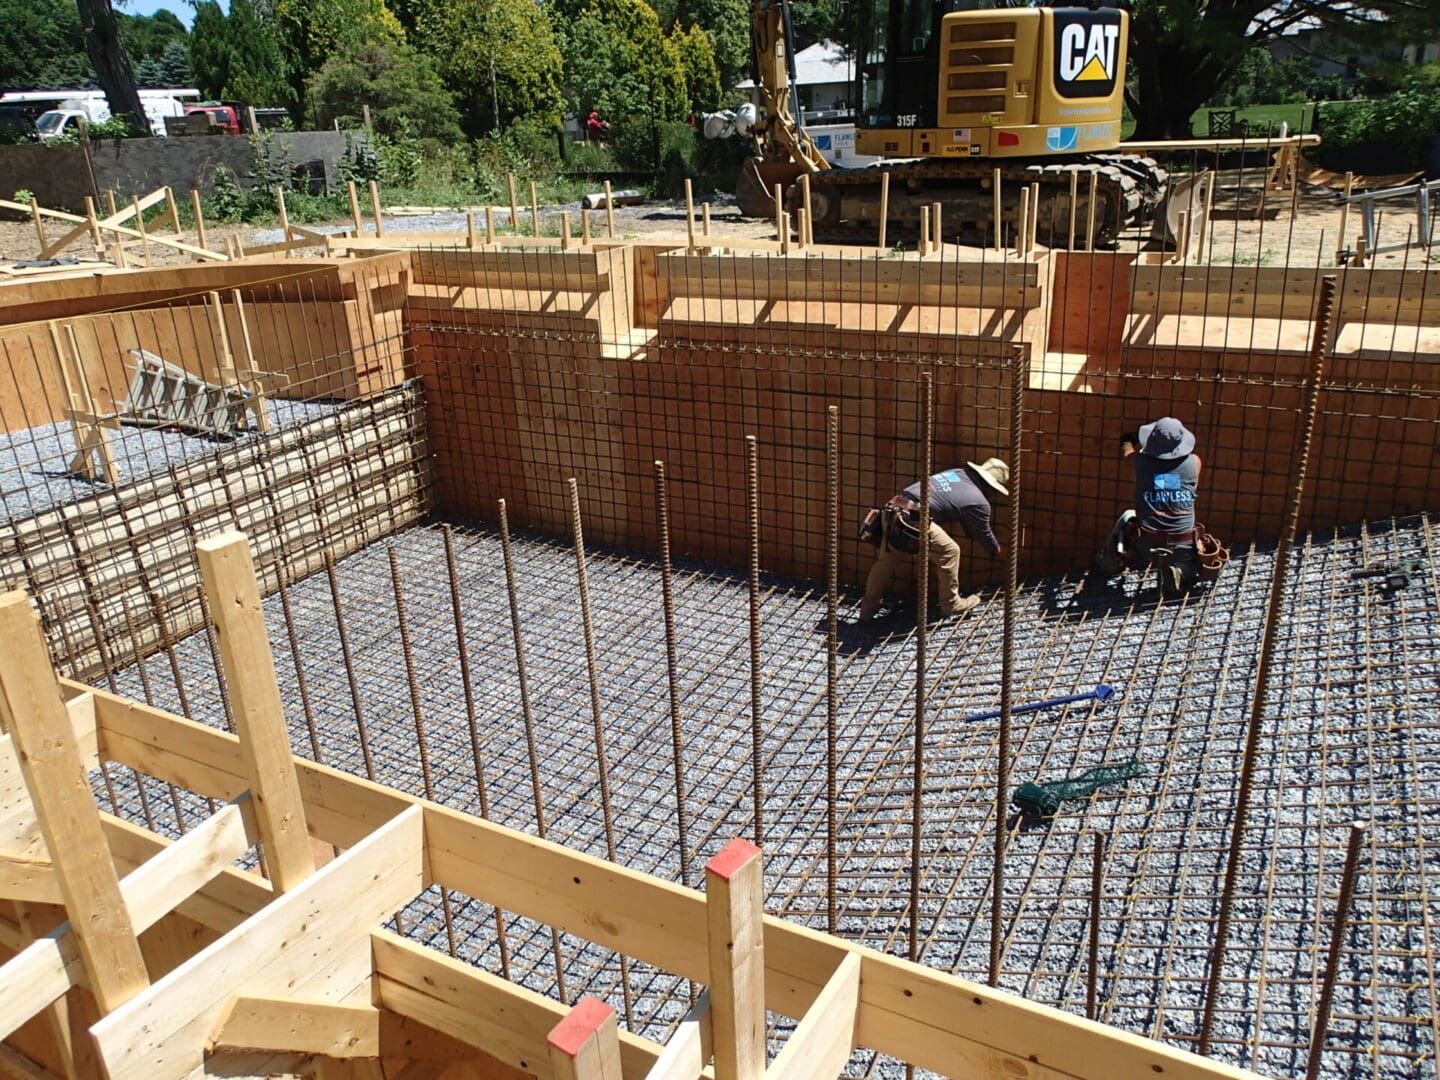 A construction site with workers working on the ground.